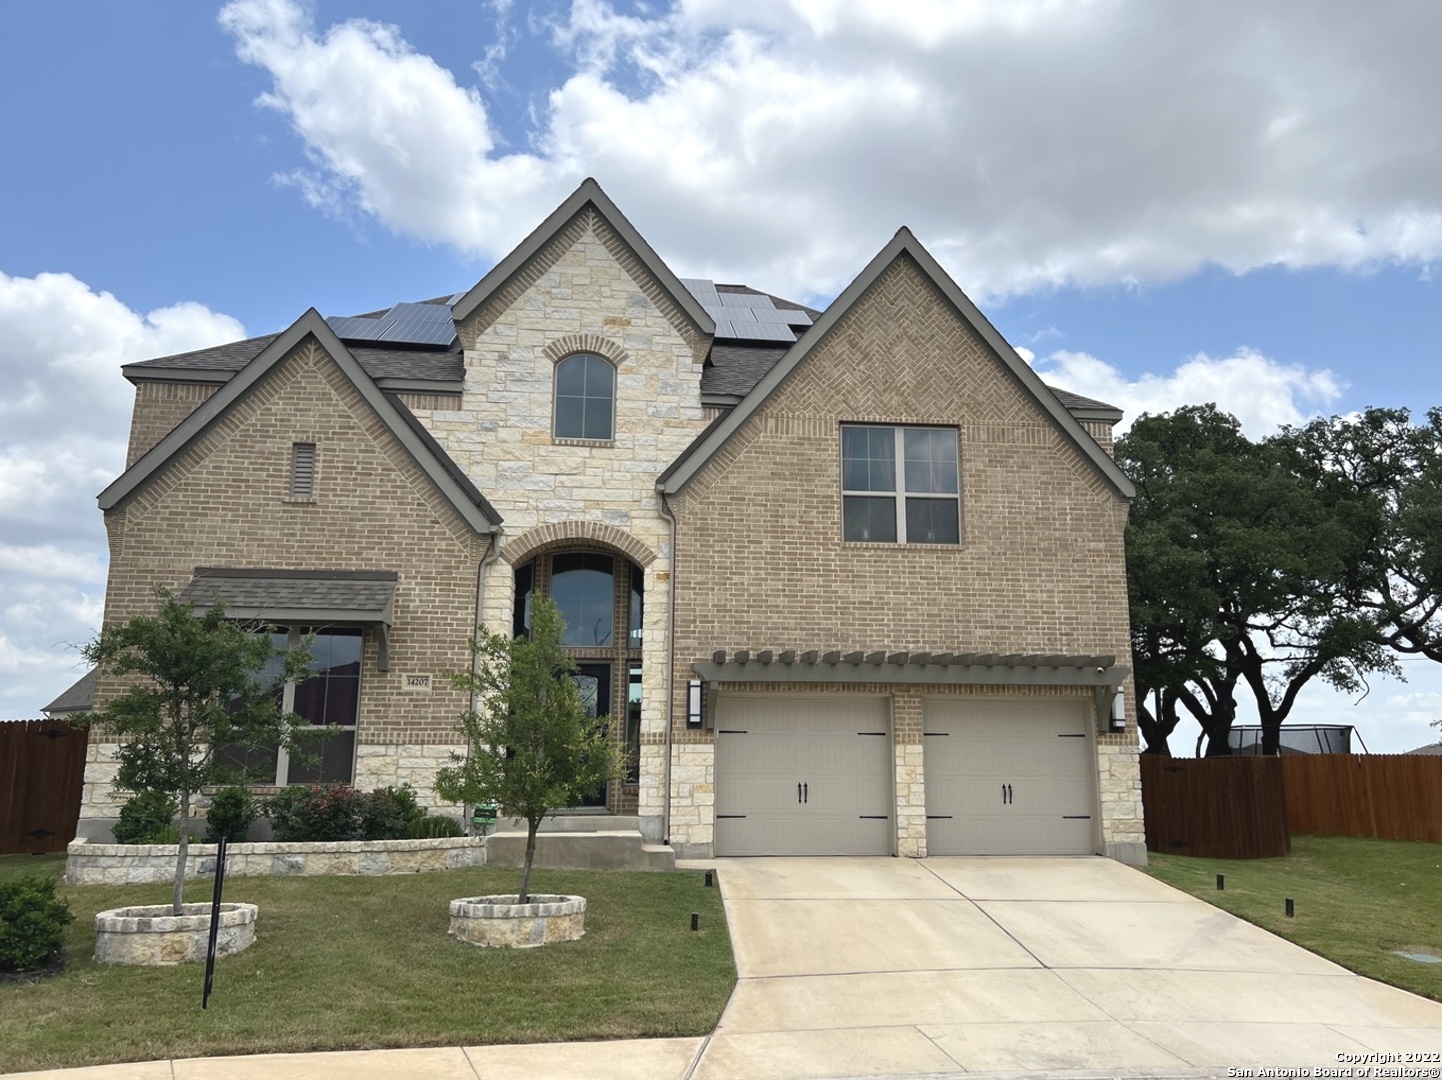 **BUYER CHANGED HIS MIND DUE TO FUNDS NEEDED!!  THIS 5 BED/4.5BA/3CG HOME SHOWS LIKE A MODEL AND COMES COMPLETE WITH SOLAR PANELS FOR LOW CPS BILLS*HURRY YOU WON'T WANT TO MISS THIS BEAUTY ON A 1/4 ACRE AT THE END OF A   CUL-DE-SAC IT DOESN'T GET MUCH BETTER!! CLOSE IN 30 DAYS AND LOCK YOUR RATE IS JUST ONE MORE BONUS TO THIS AMAZING HOME IN KALLISON RANCH*TOP OF THE LINE WATER SOFT. & THESE SELLERS PAID FOR A WARRANTIED TERMITE SYSTEM* RELAX ON THE COVERED PATIO AFTER A LONG DAY AND LISTEN TO THE BIRDS SING AMONST THE BIG OAKS TREES!